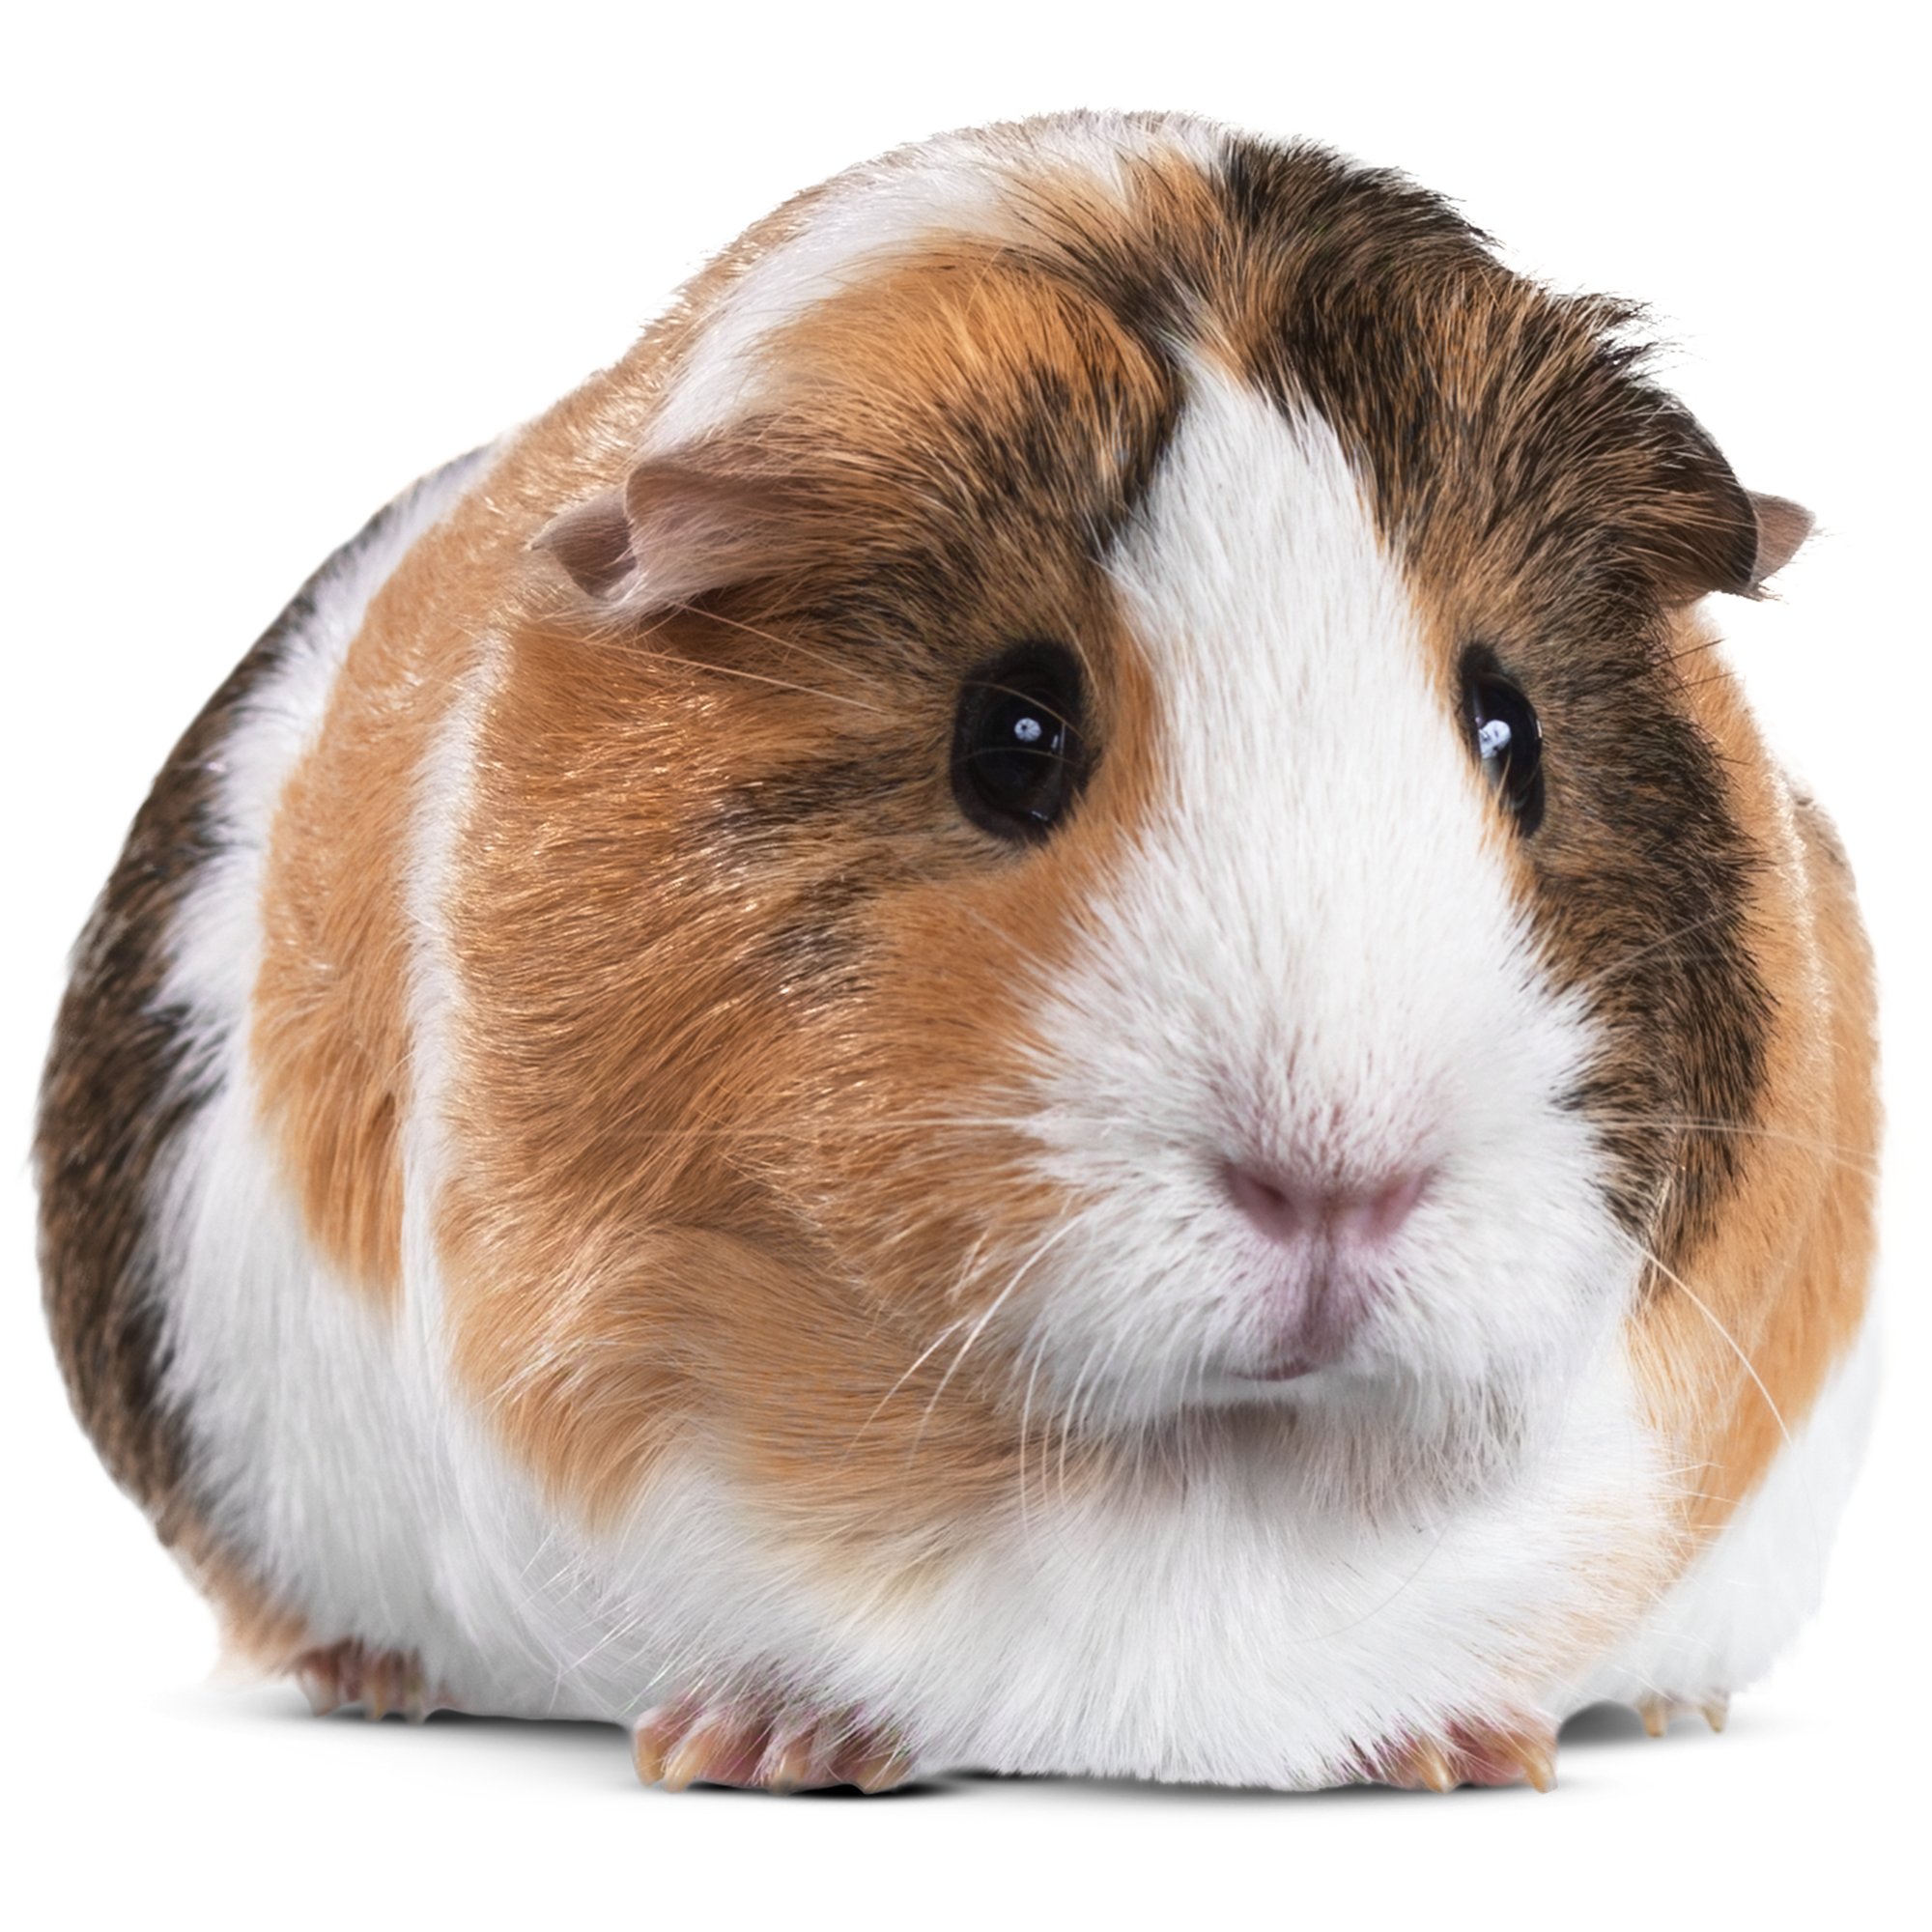 Guinea Pigs for Sale: Buy Live Guinea Pigs for Sale | Petco